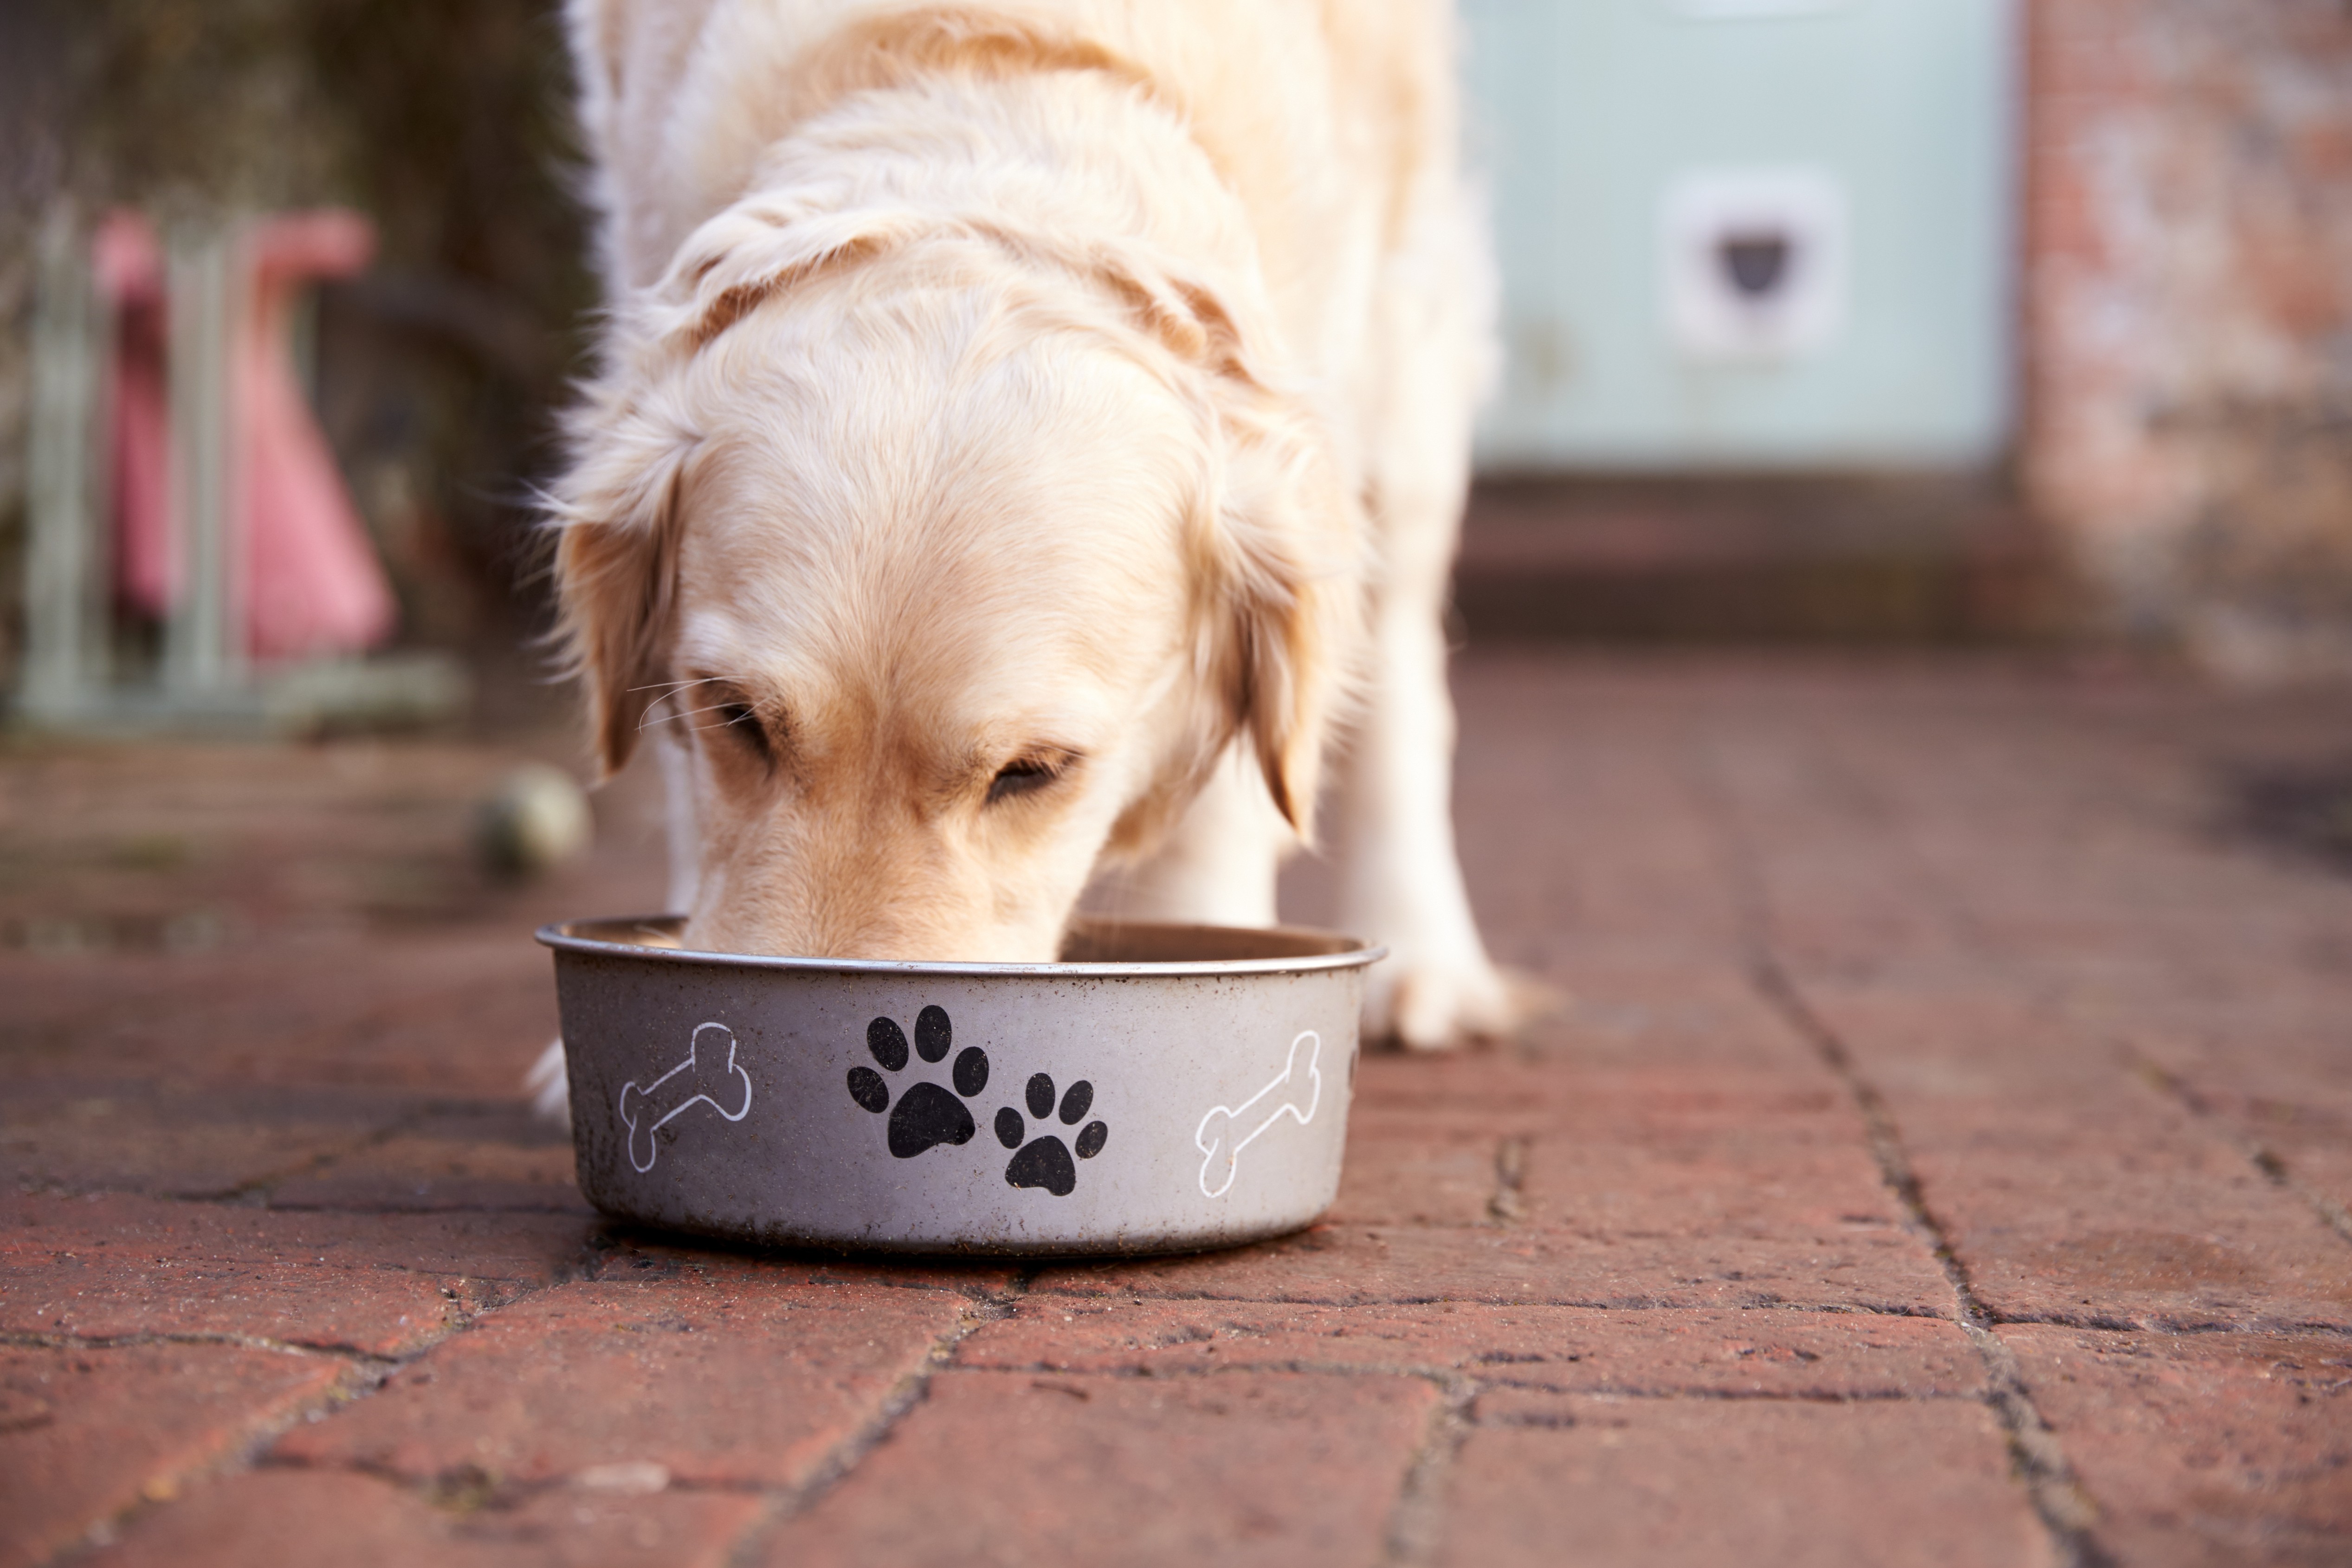 What to Feed a Dog with a Sensitive Stomach